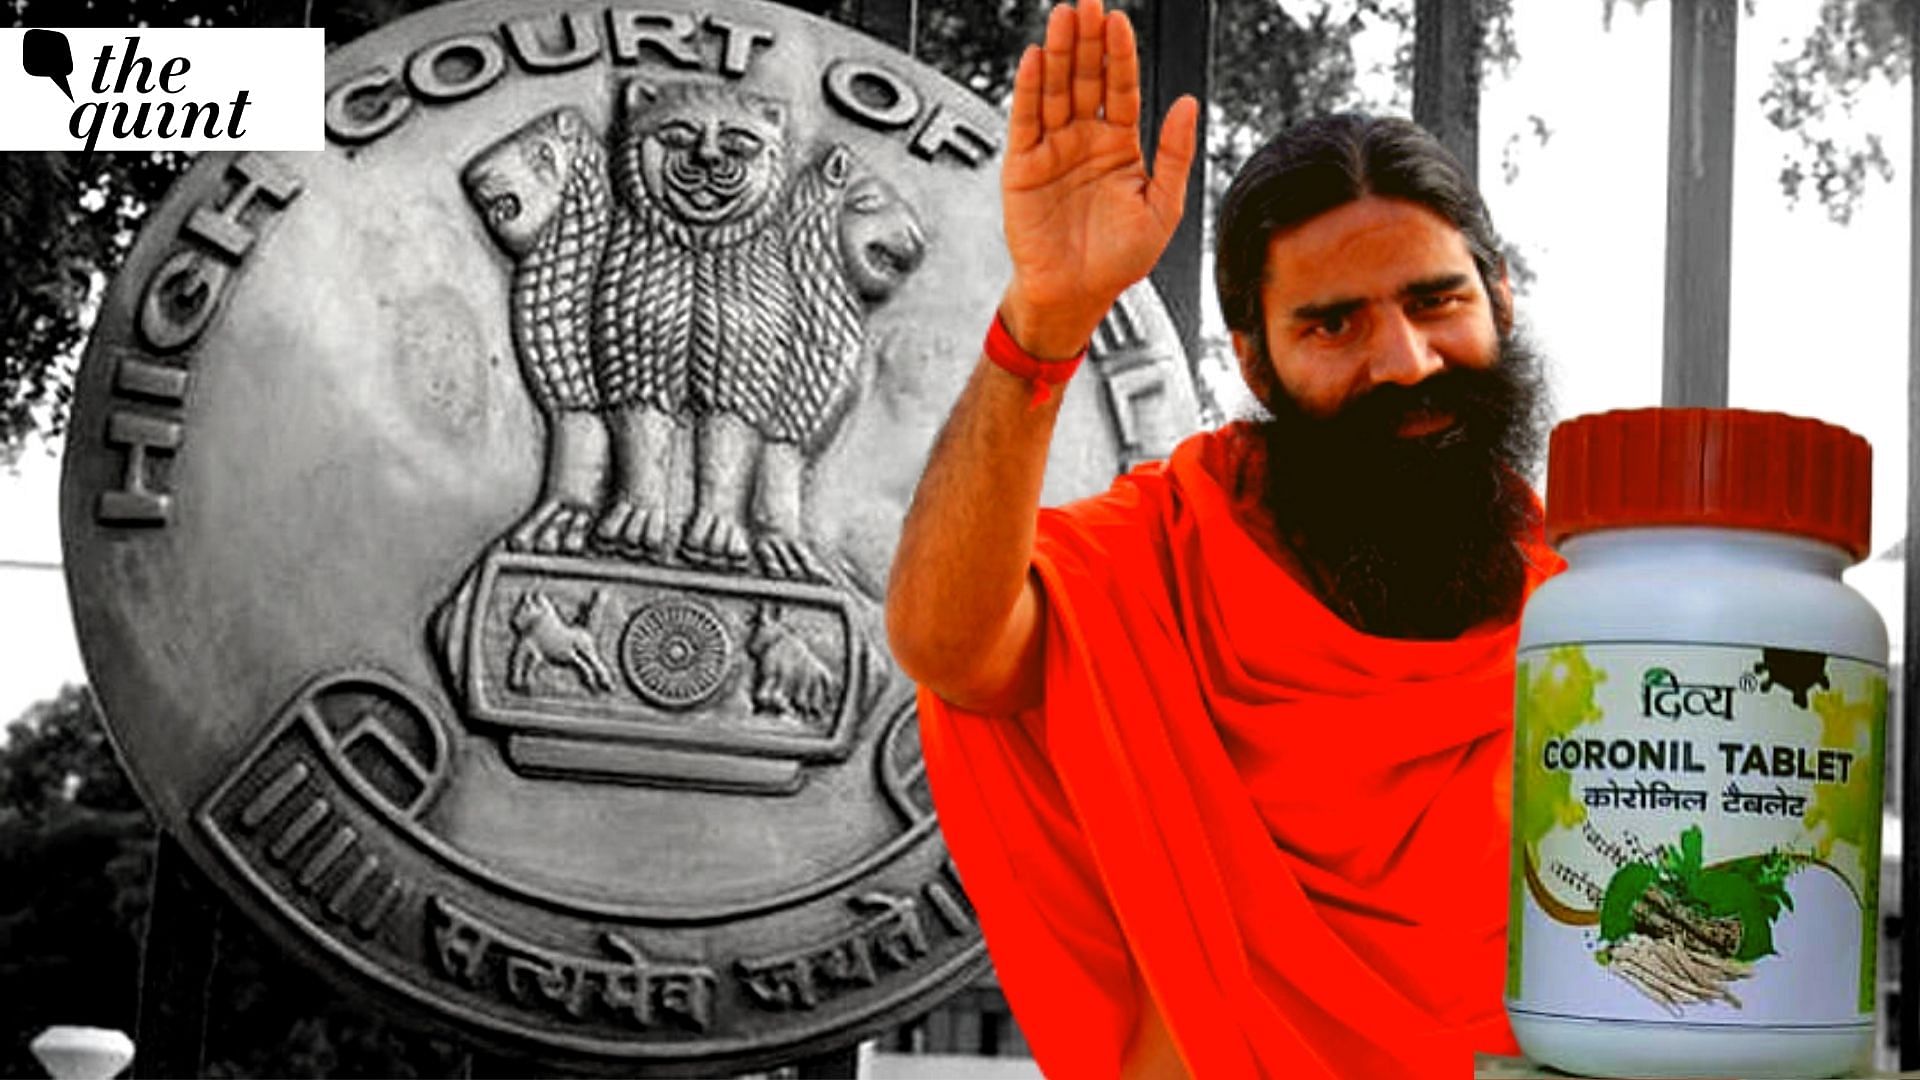 The Delhi High Court, on Thursday, 3 June, issued summons to yoga guru and entrepreneur Baba Ramdev, in a plea, seeking to restrain him from spreading false information about Patanjali’s Coronil. Image used for representation purpose.